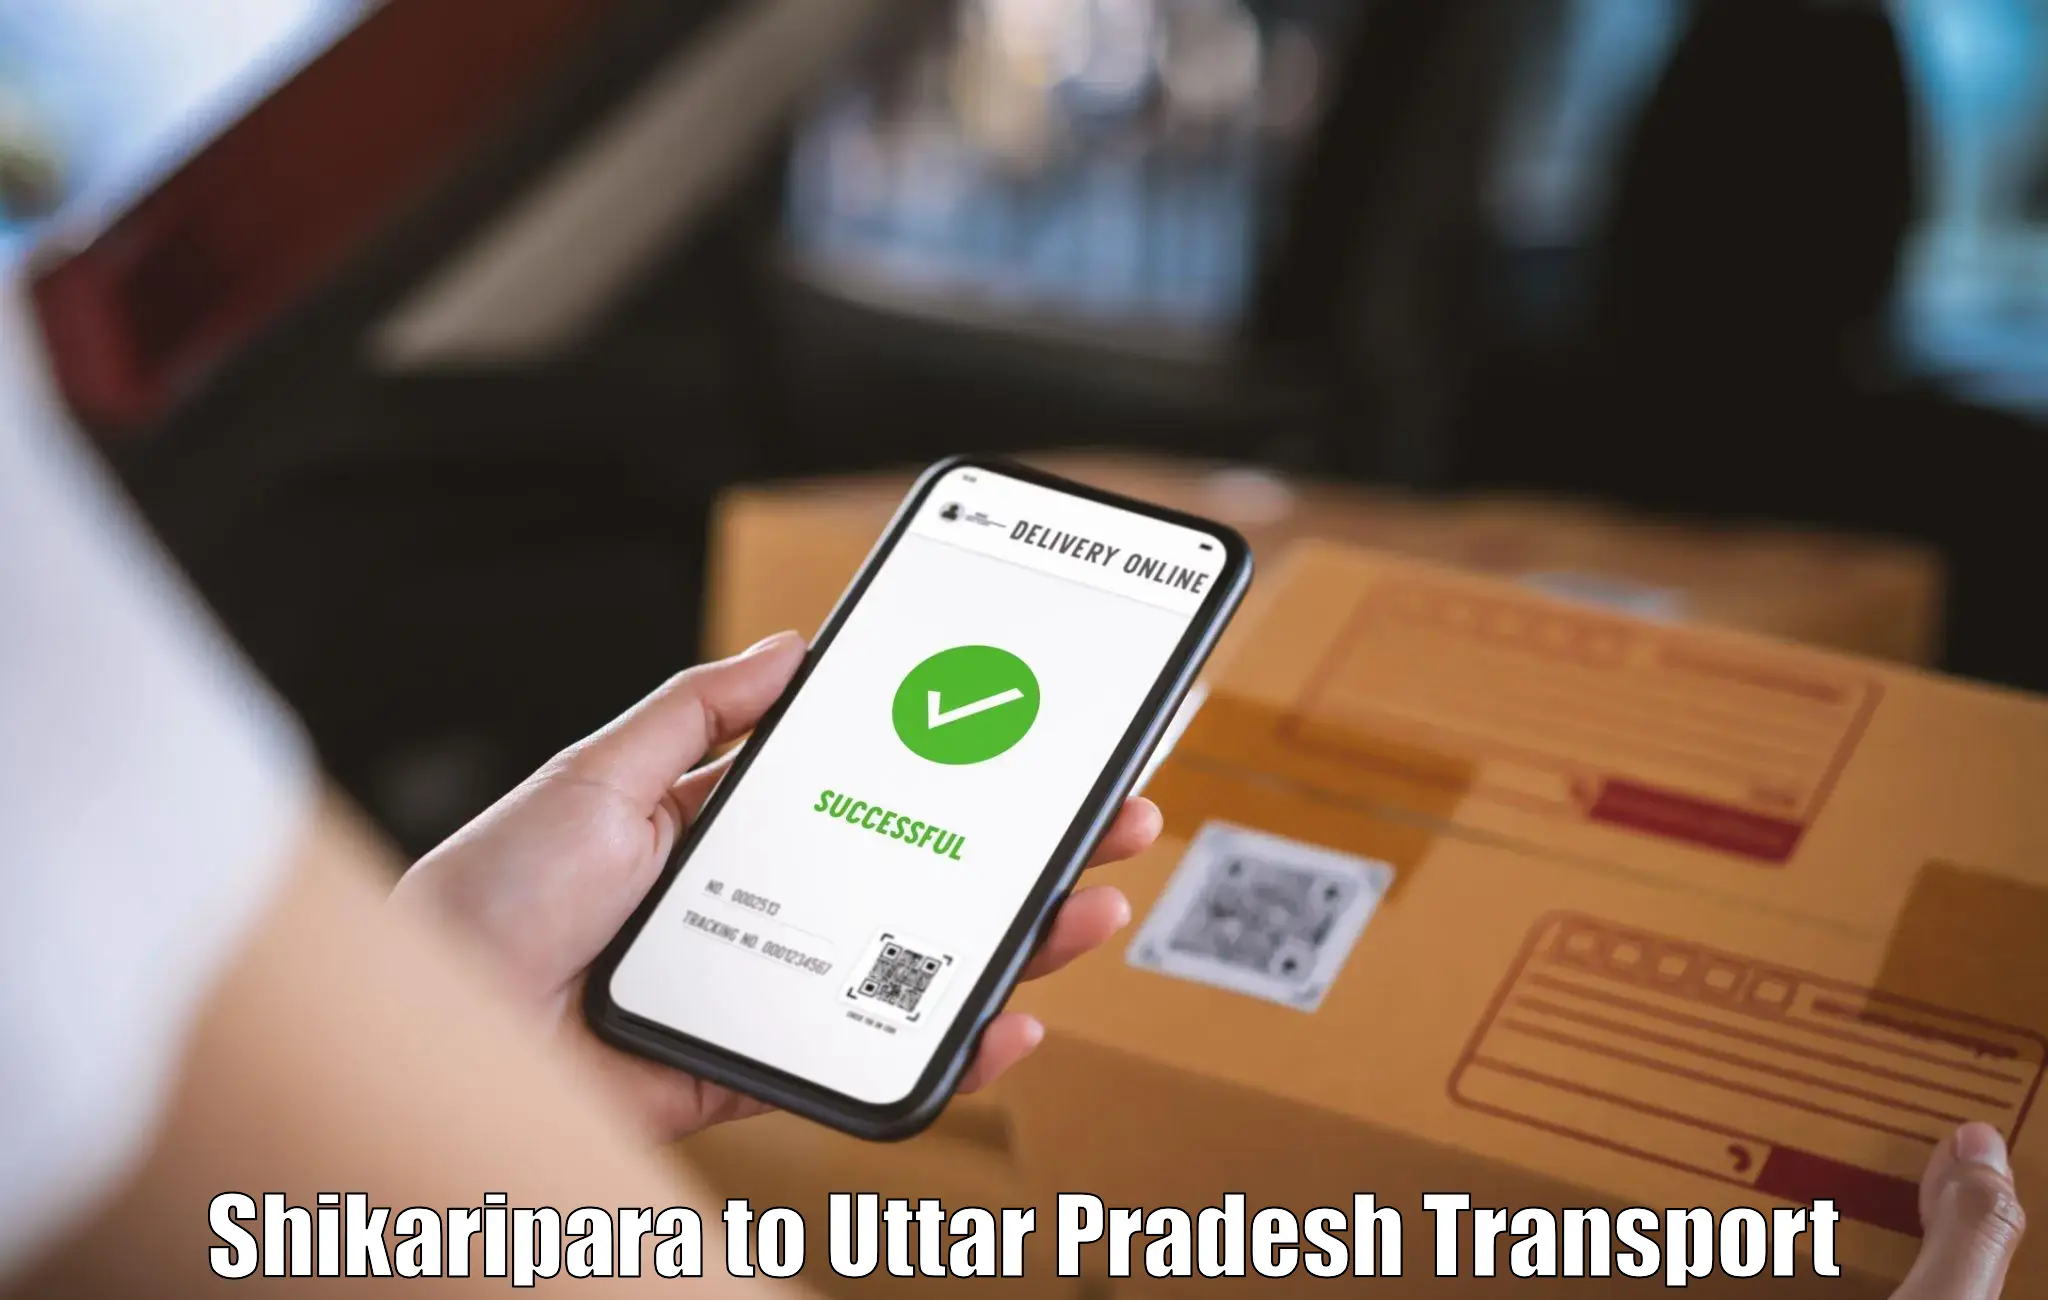 Parcel transport services Shikaripara to Lucknow